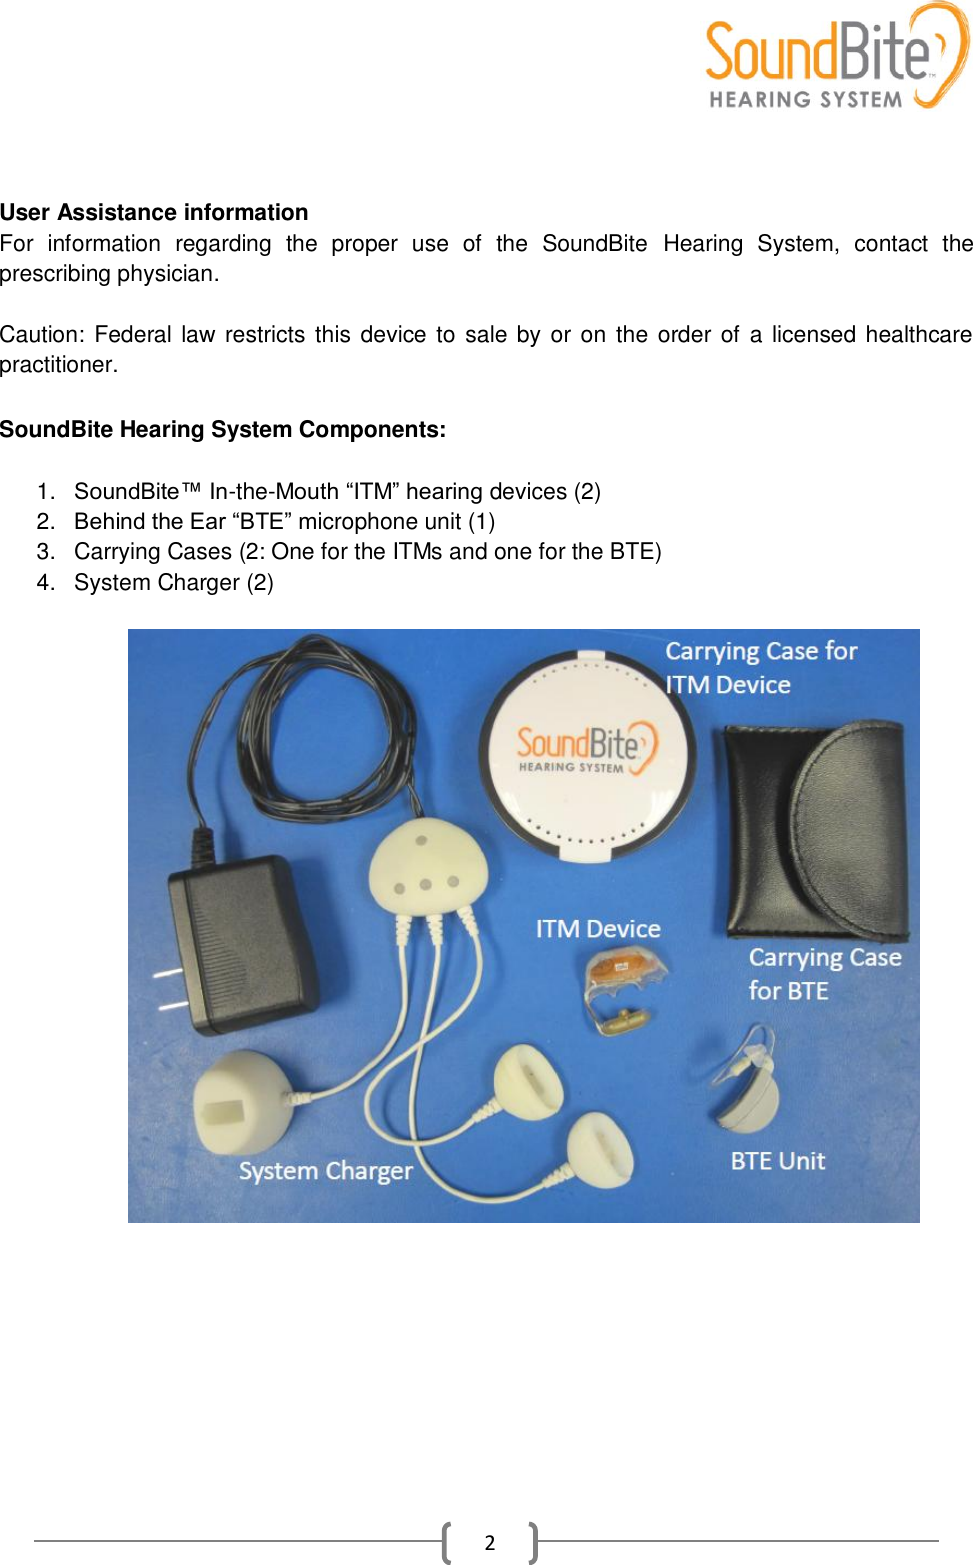    2   User Assistance information For  information  regarding  the  proper  use  of  the  SoundBite  Hearing  System,  contact  the prescribing physician.  Caution: Federal law restricts this device to sale by or on the order of a licensed healthcare practitioner.   SoundBite Hearing System Components:  1. SoundBite™ In-the-Mouth ―ITM‖ hearing devices (2) 2. Behind the Ear ―BTE‖ microphone unit (1) 3.  Carrying Cases (2: One for the ITMs and one for the BTE) 4.  System Charger (2)    